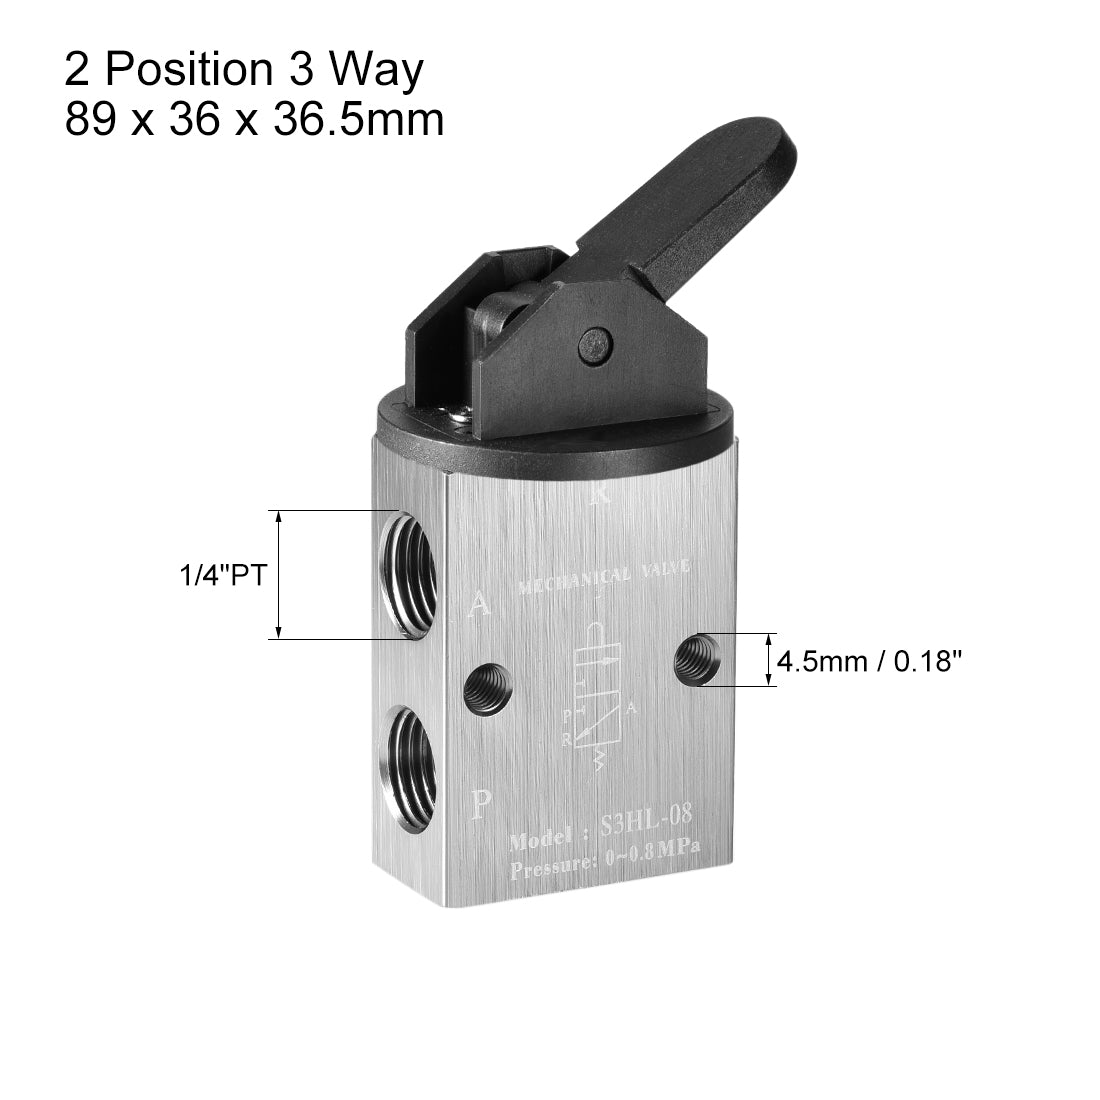 uxcell Uxcell S3HL-08 2 Position 3 Way 1/4" PT Manual Hand Pull Pneumatic Solenoid Mechanical Valve 2pcs